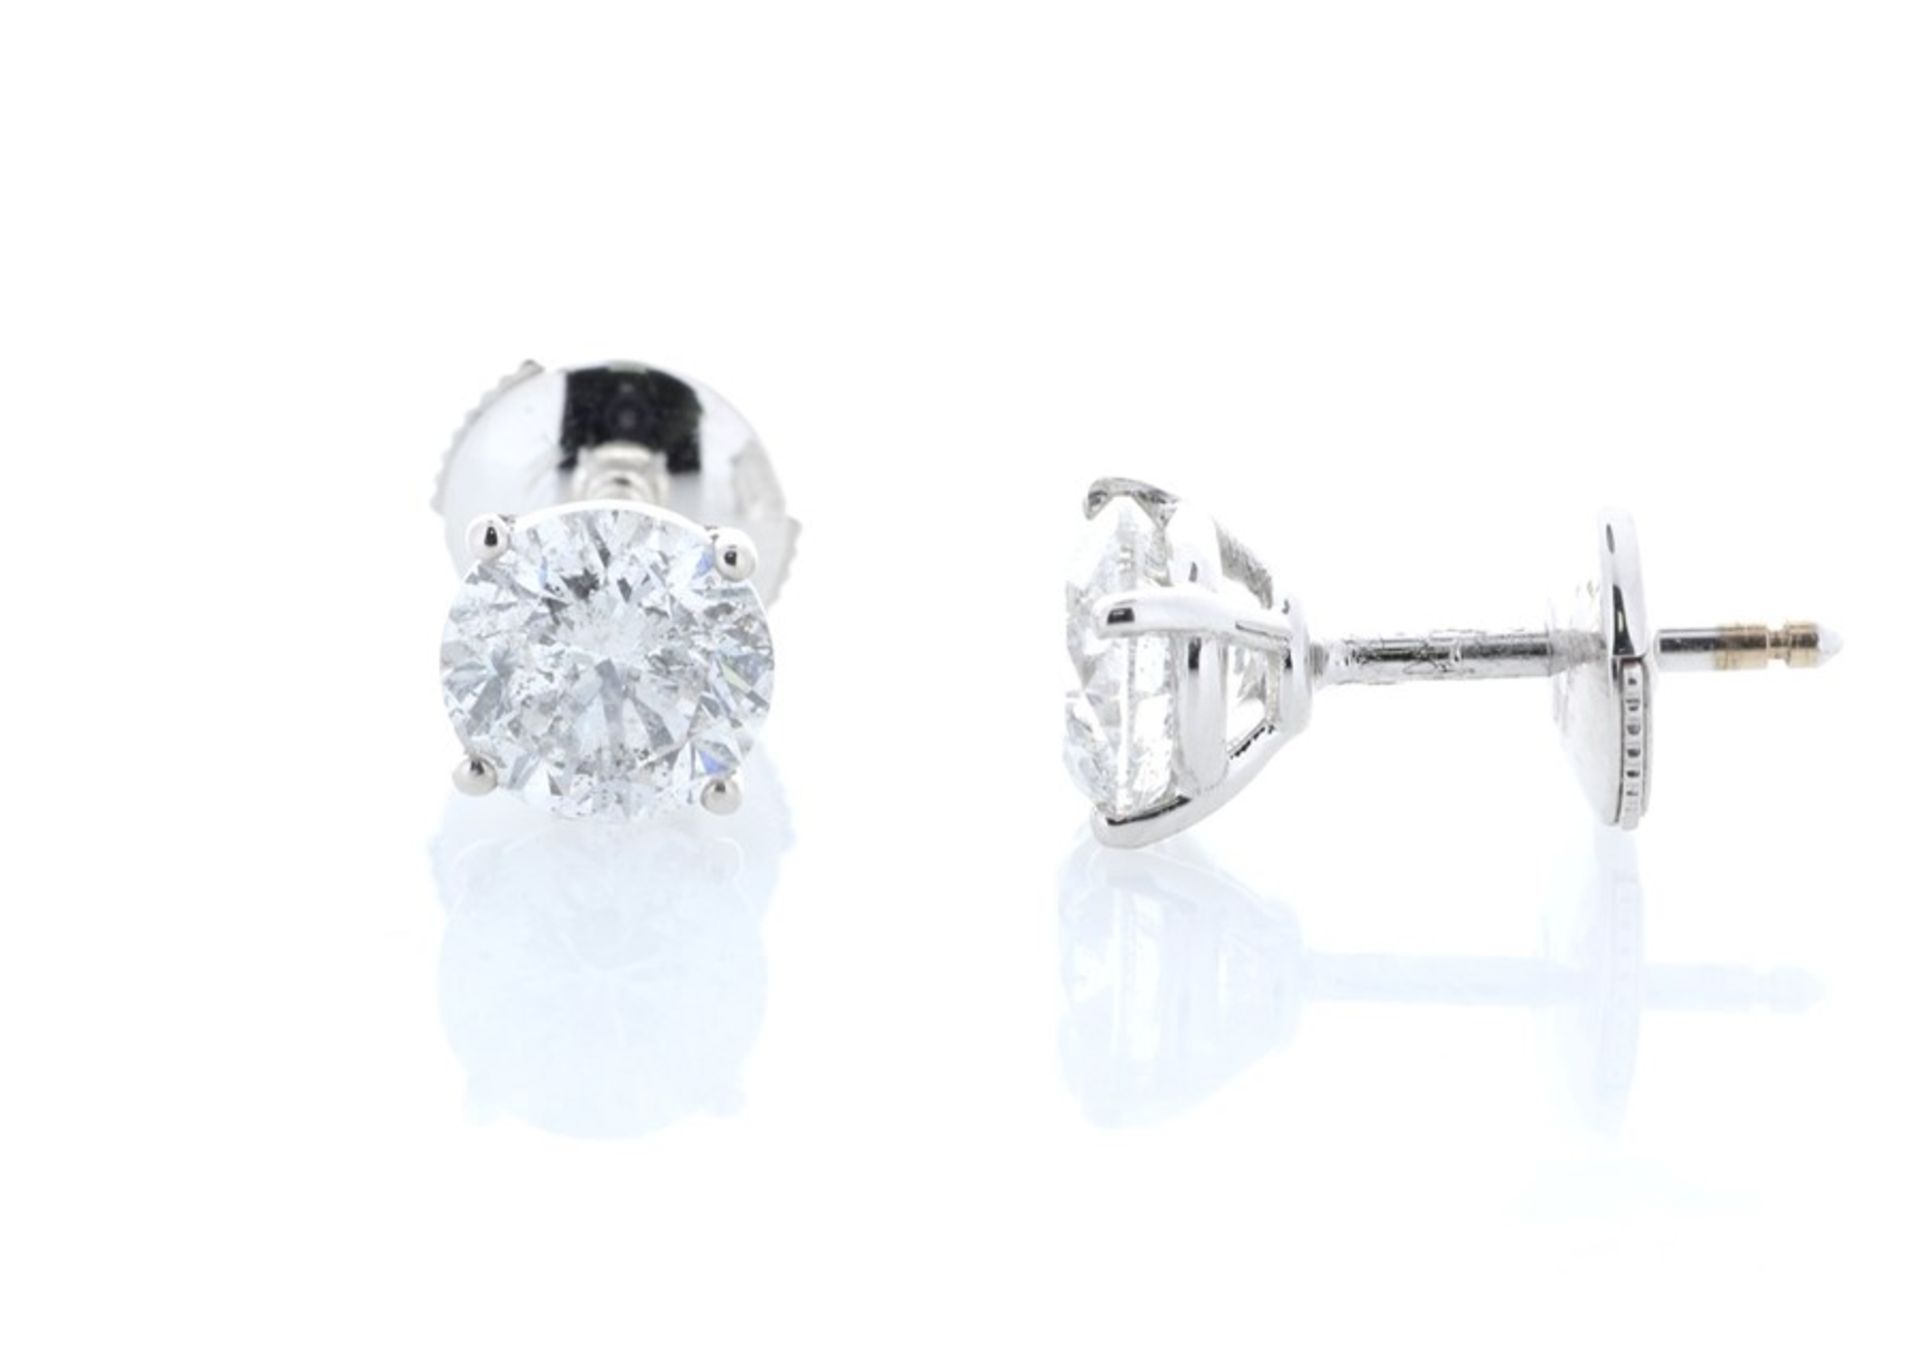 18ct White Gold Single Stone Claw Set Diamond Earrings Valued by GIE £4,889.00 - Image 2 of 4